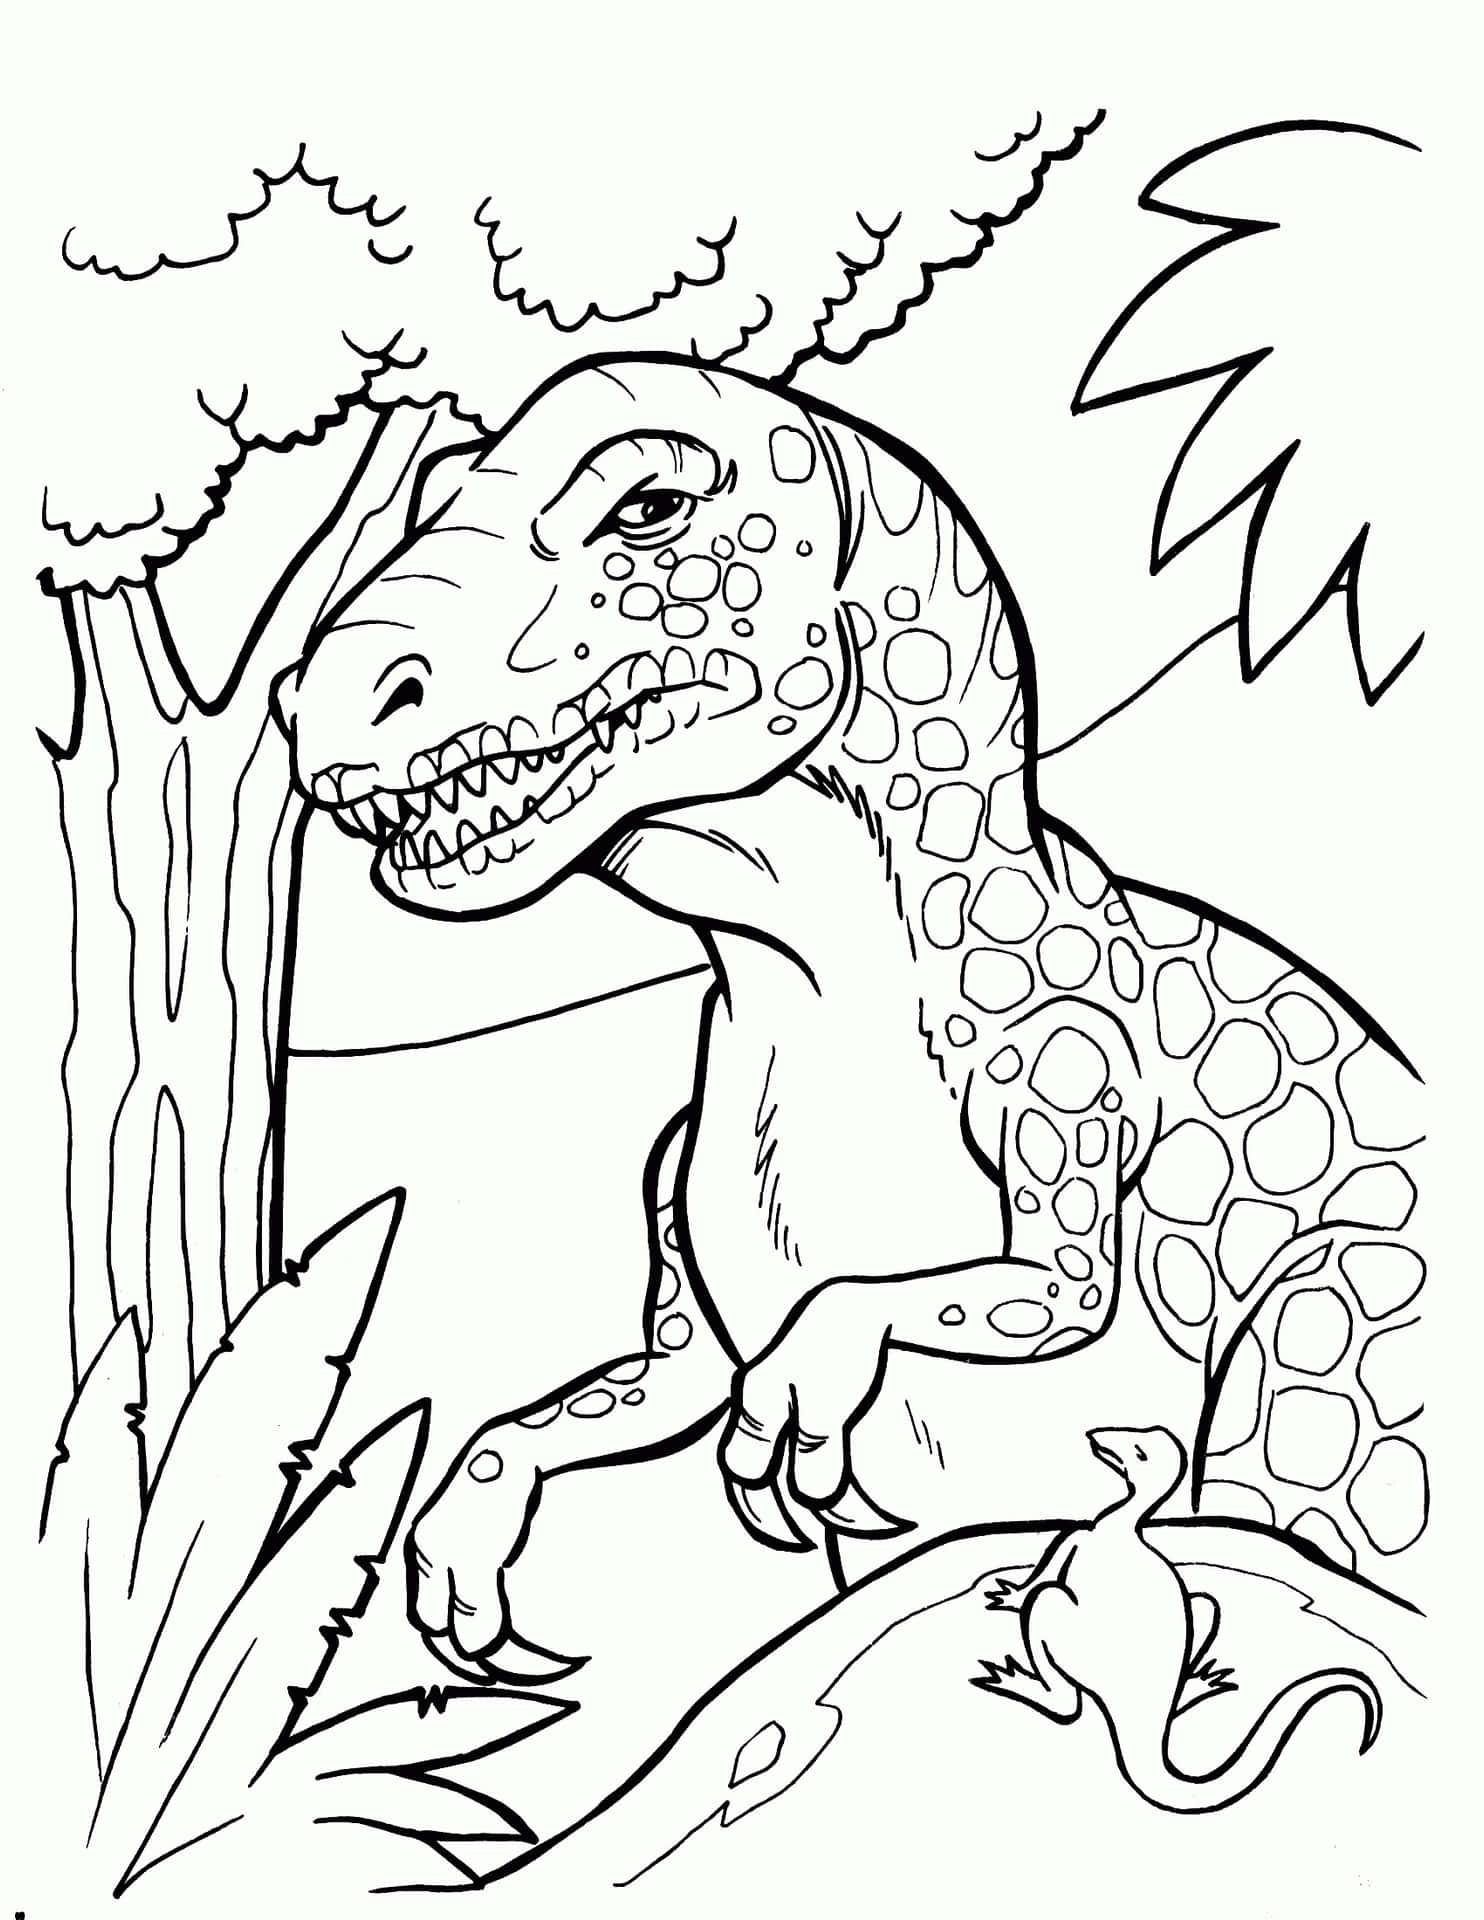 A Dinosaur Coloring Page With A Tree And A Bird